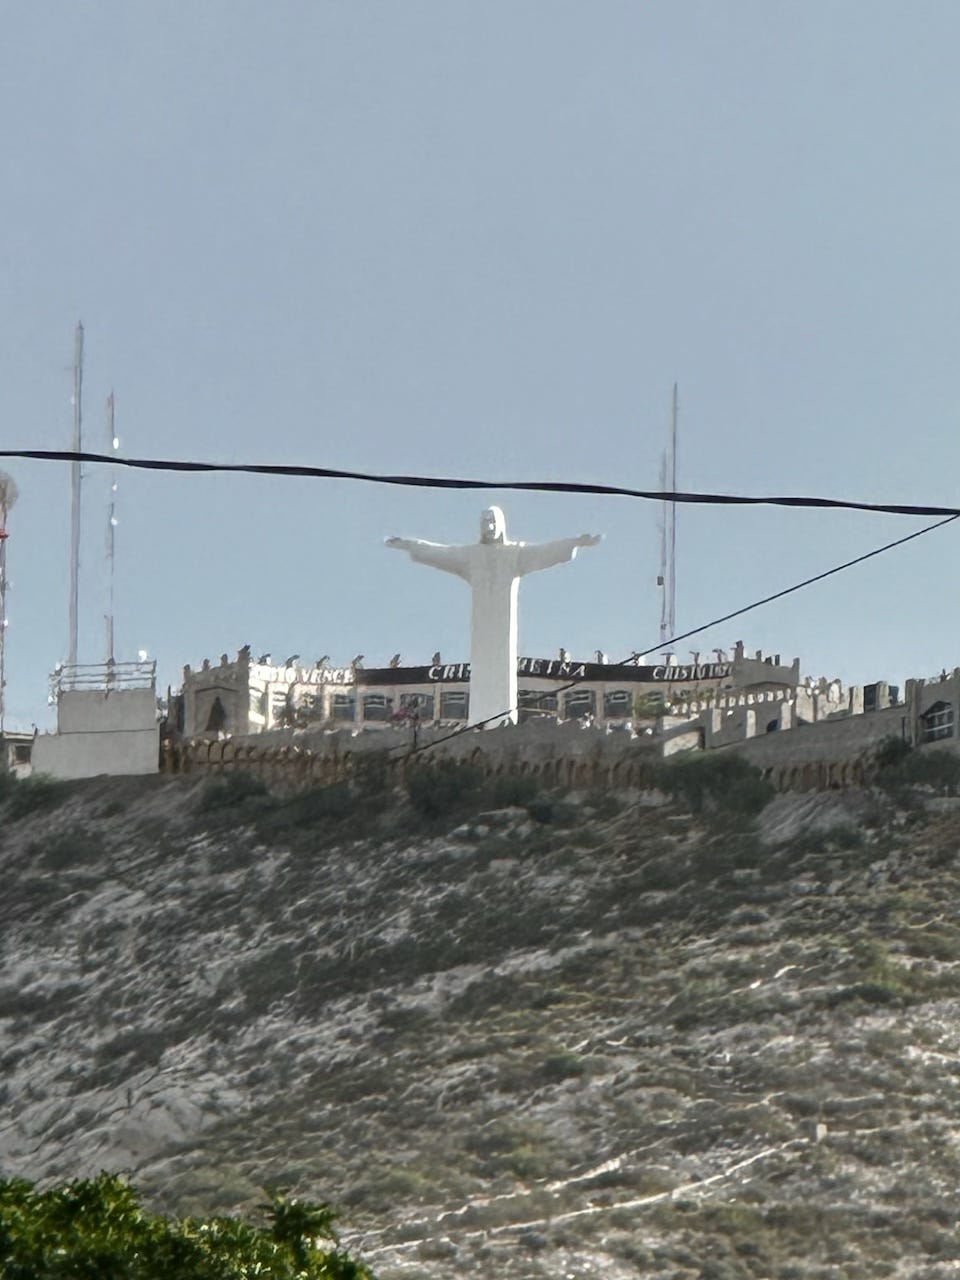 The statue of Cristo de las Noas, snapped with my phone from what was apparently an unsafe part of town.